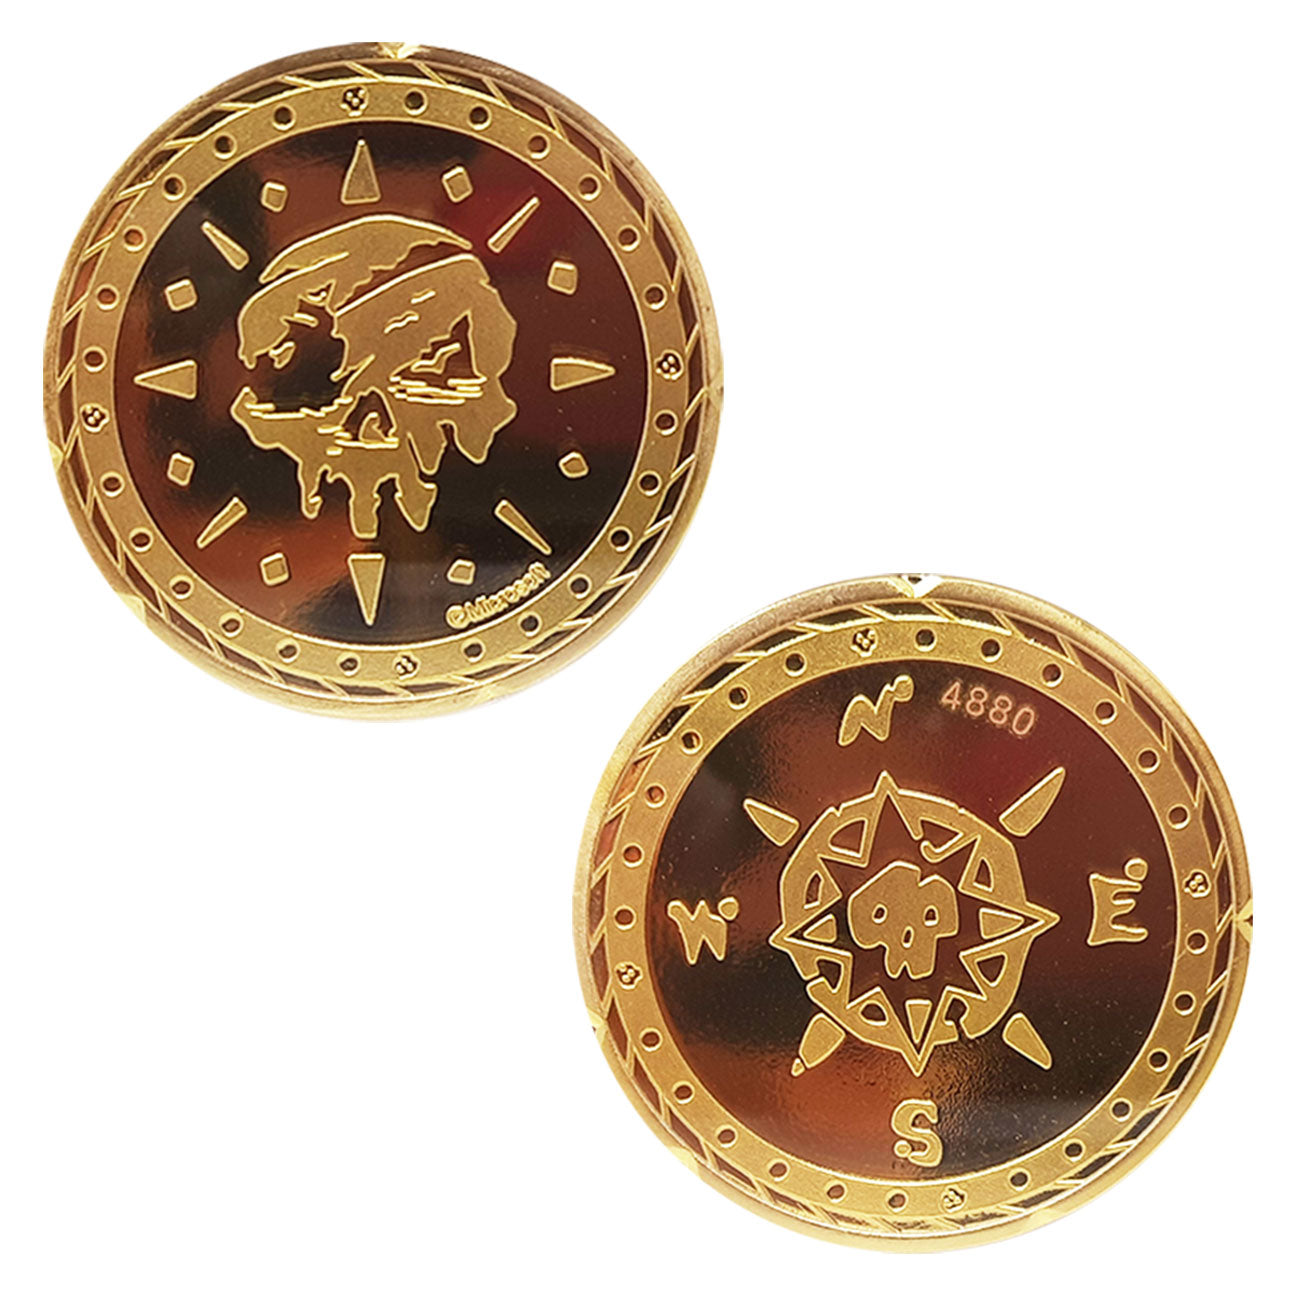 Sea of Thieves Limited Edition Gold Coin from Fanattik